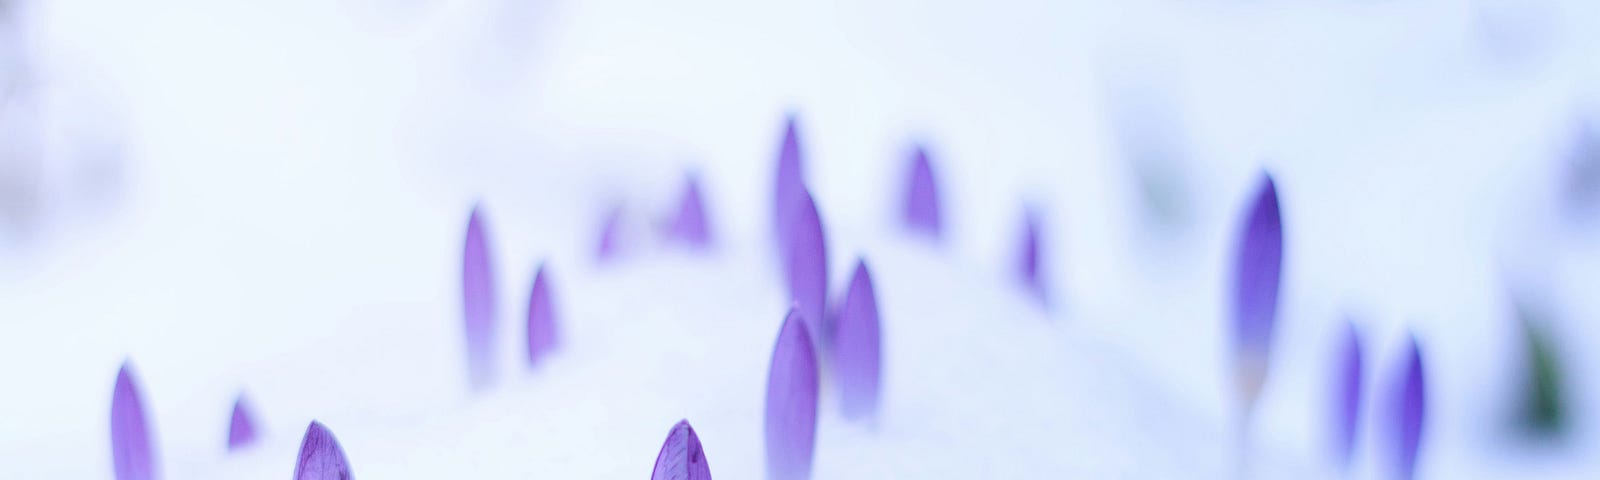 The purple tips of flower buds peeking out of the snow.